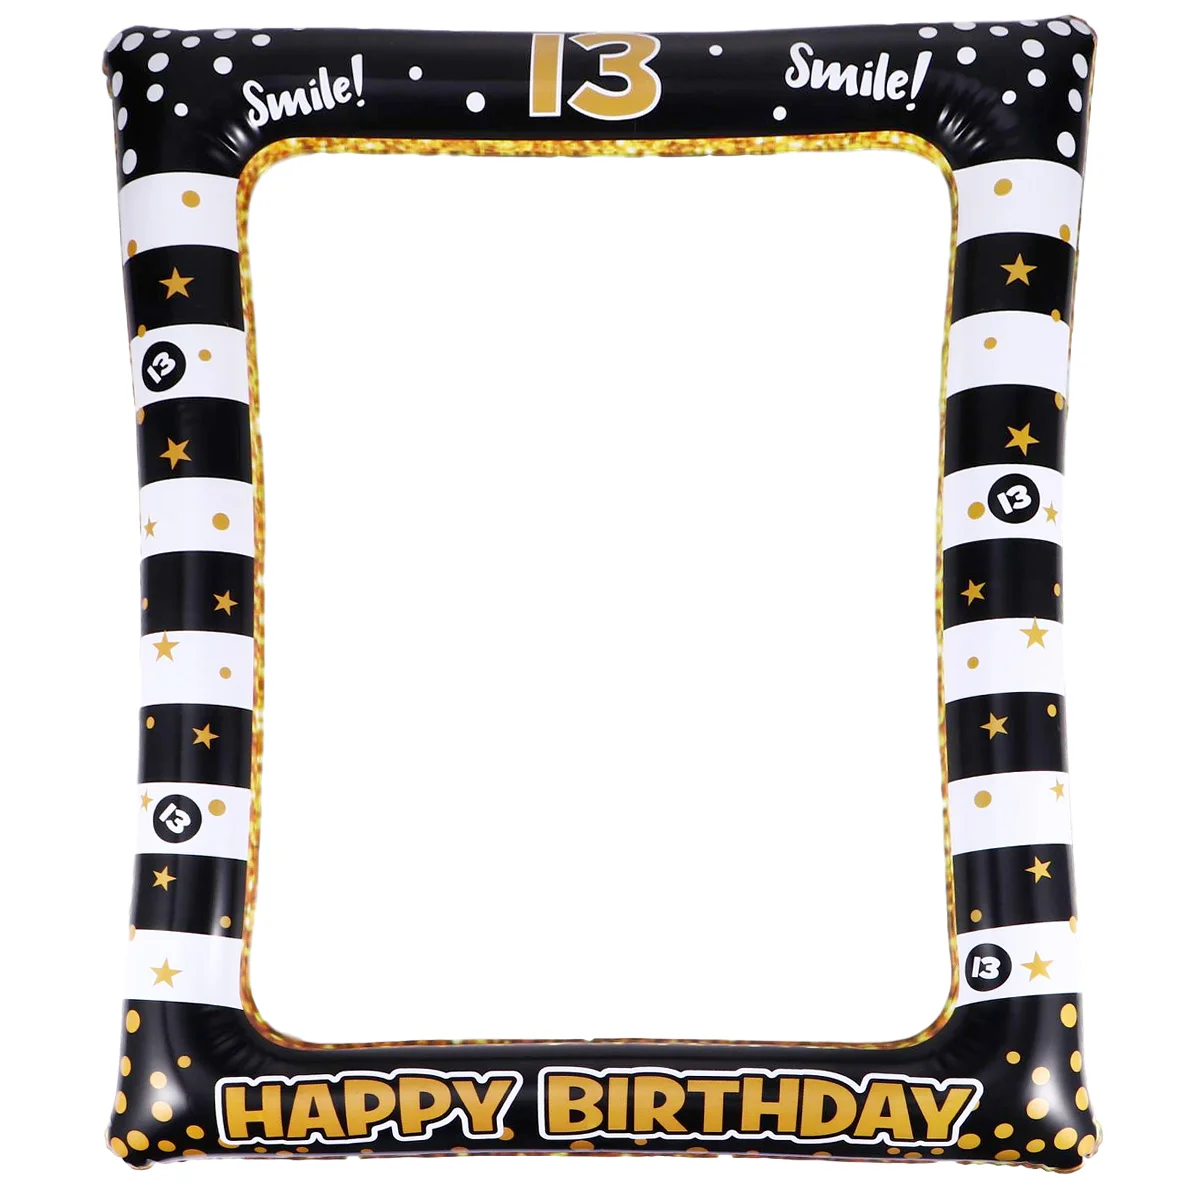 Funny Photo Booth Prop Wedding Props 13th Birthday Party Decor Birthday Photo Collection Inflatable Picture Gold Wedding Decor